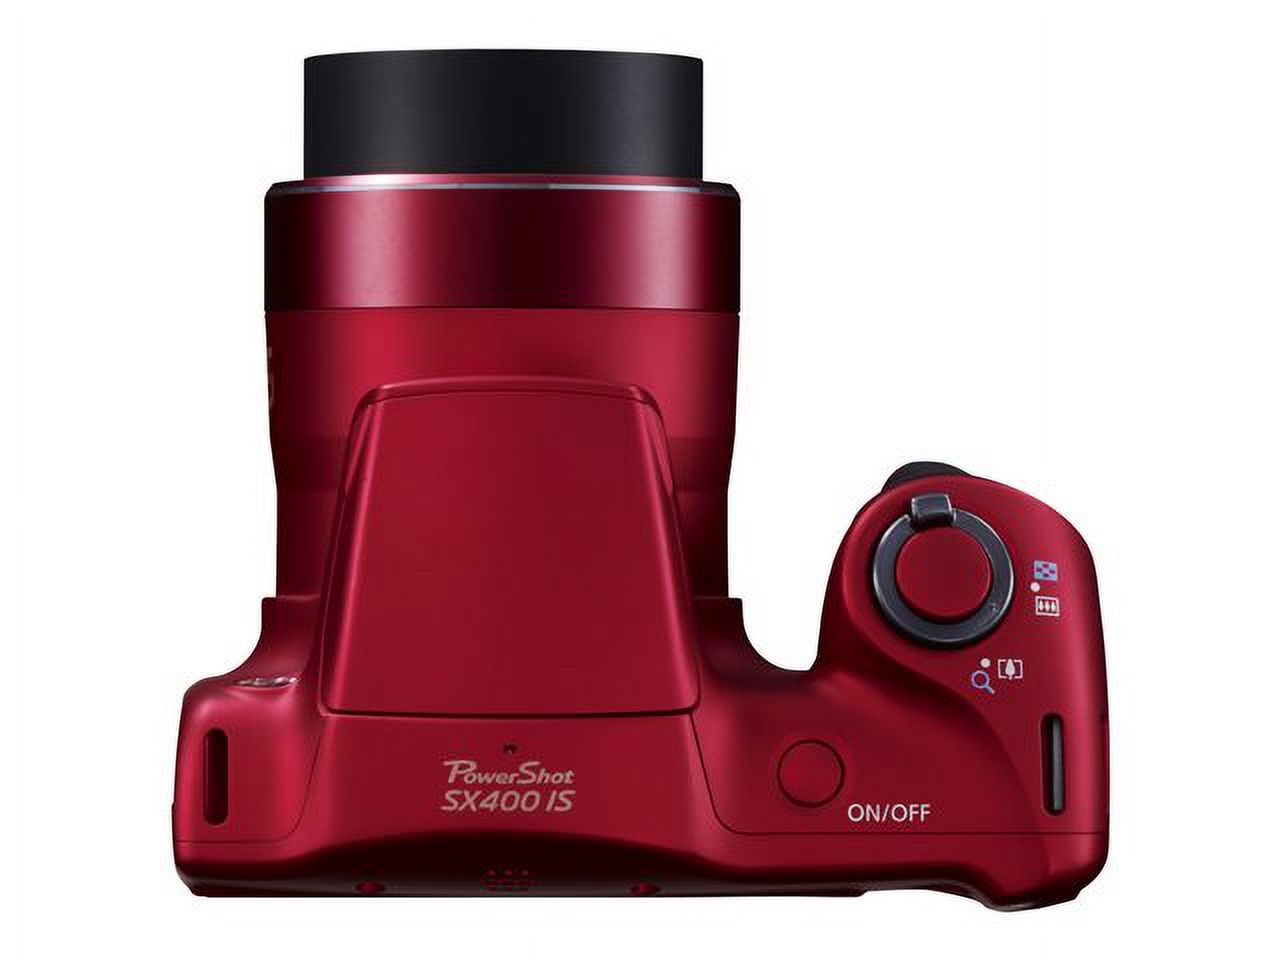 Canon PowerShot SX400 IS - Digital camera - High Definition - compact - 16.0 MP - 30 x optical zoom - red - image 54 of 72